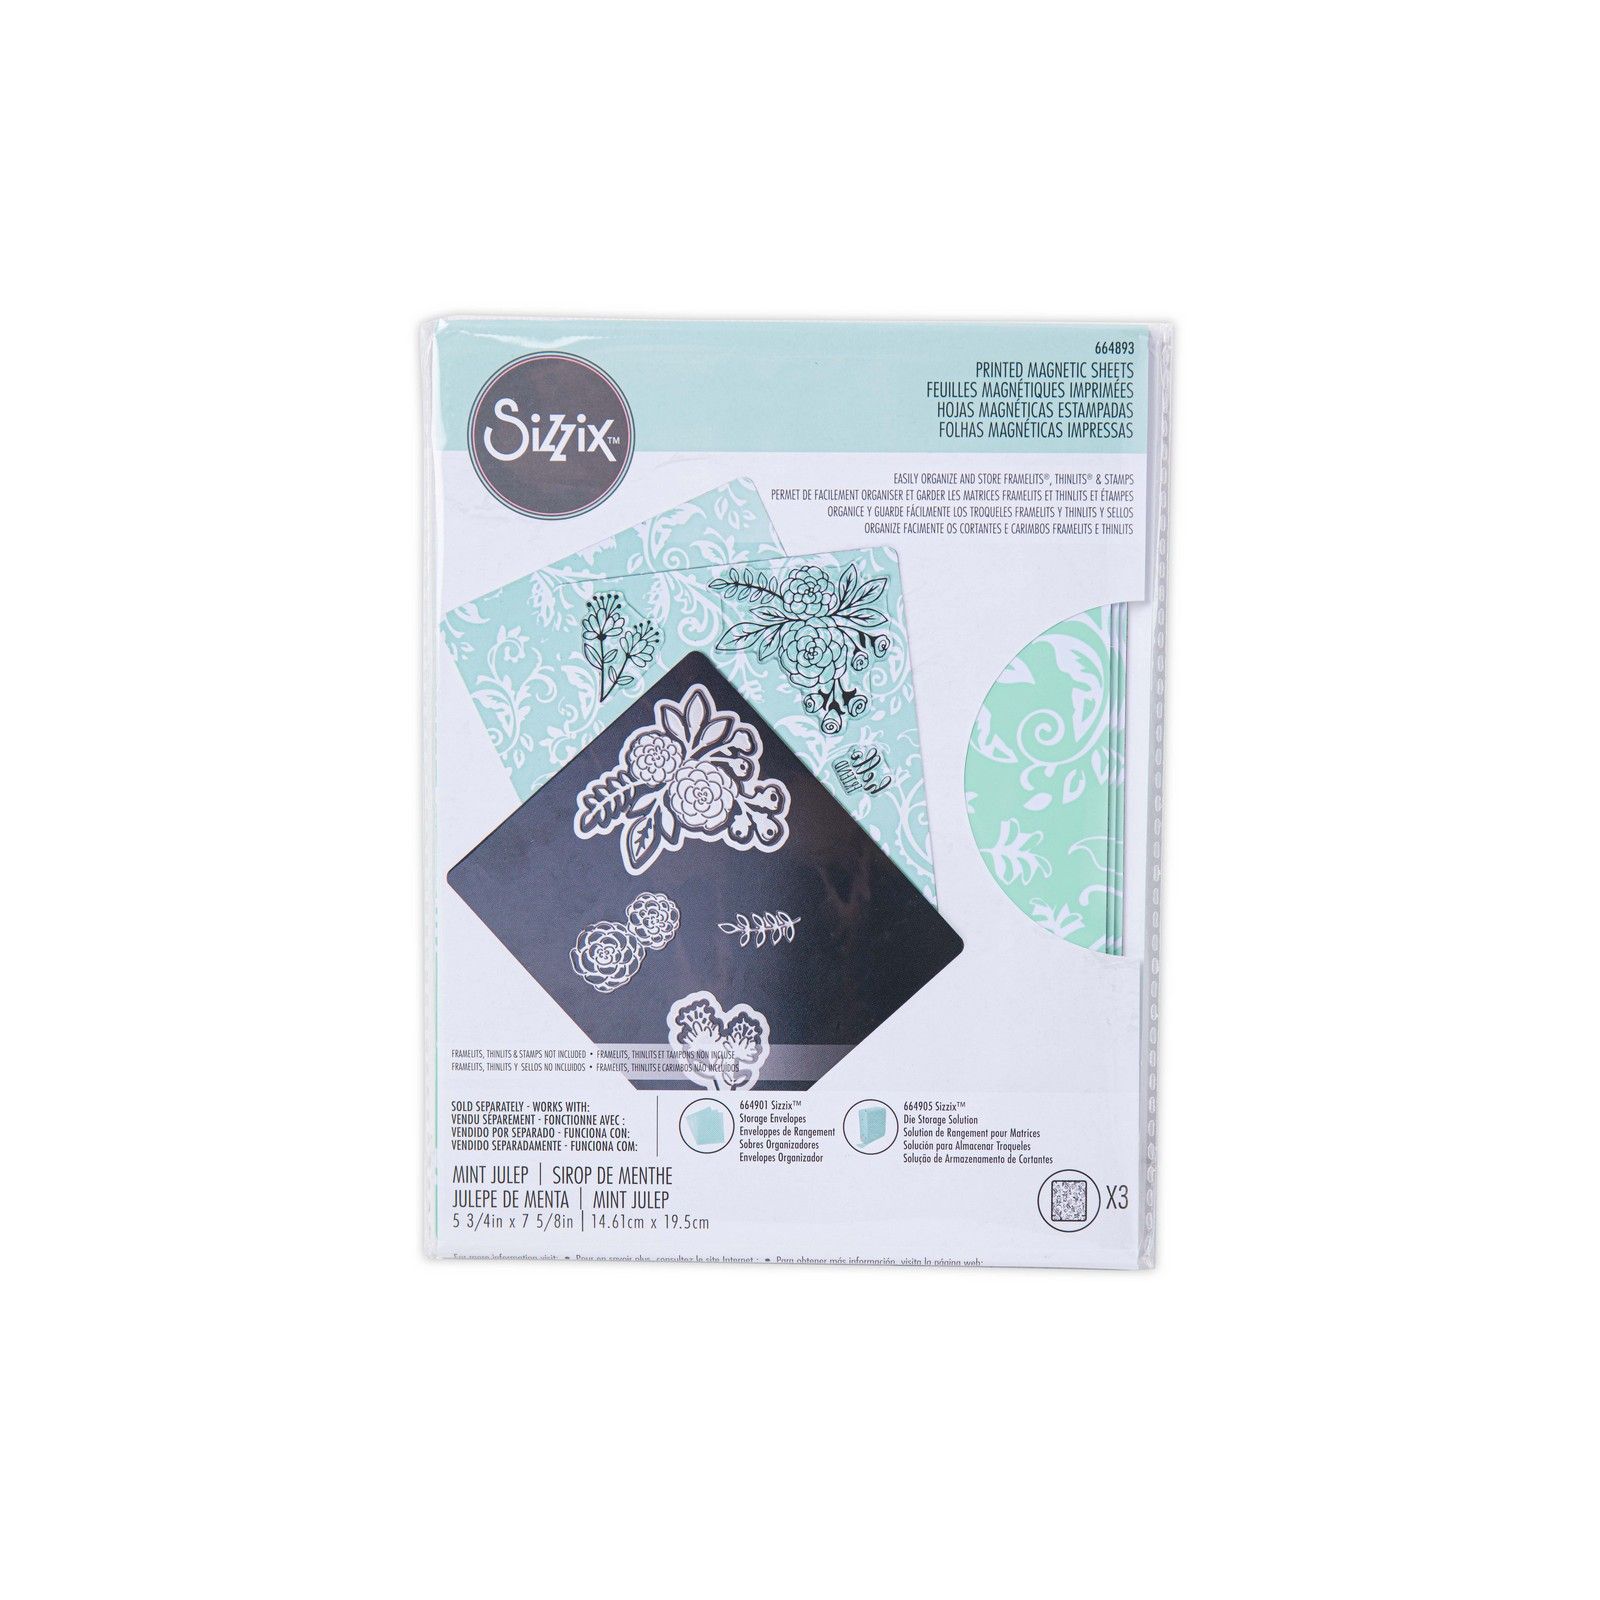 Sizzix • Storage printed magnetic sheets